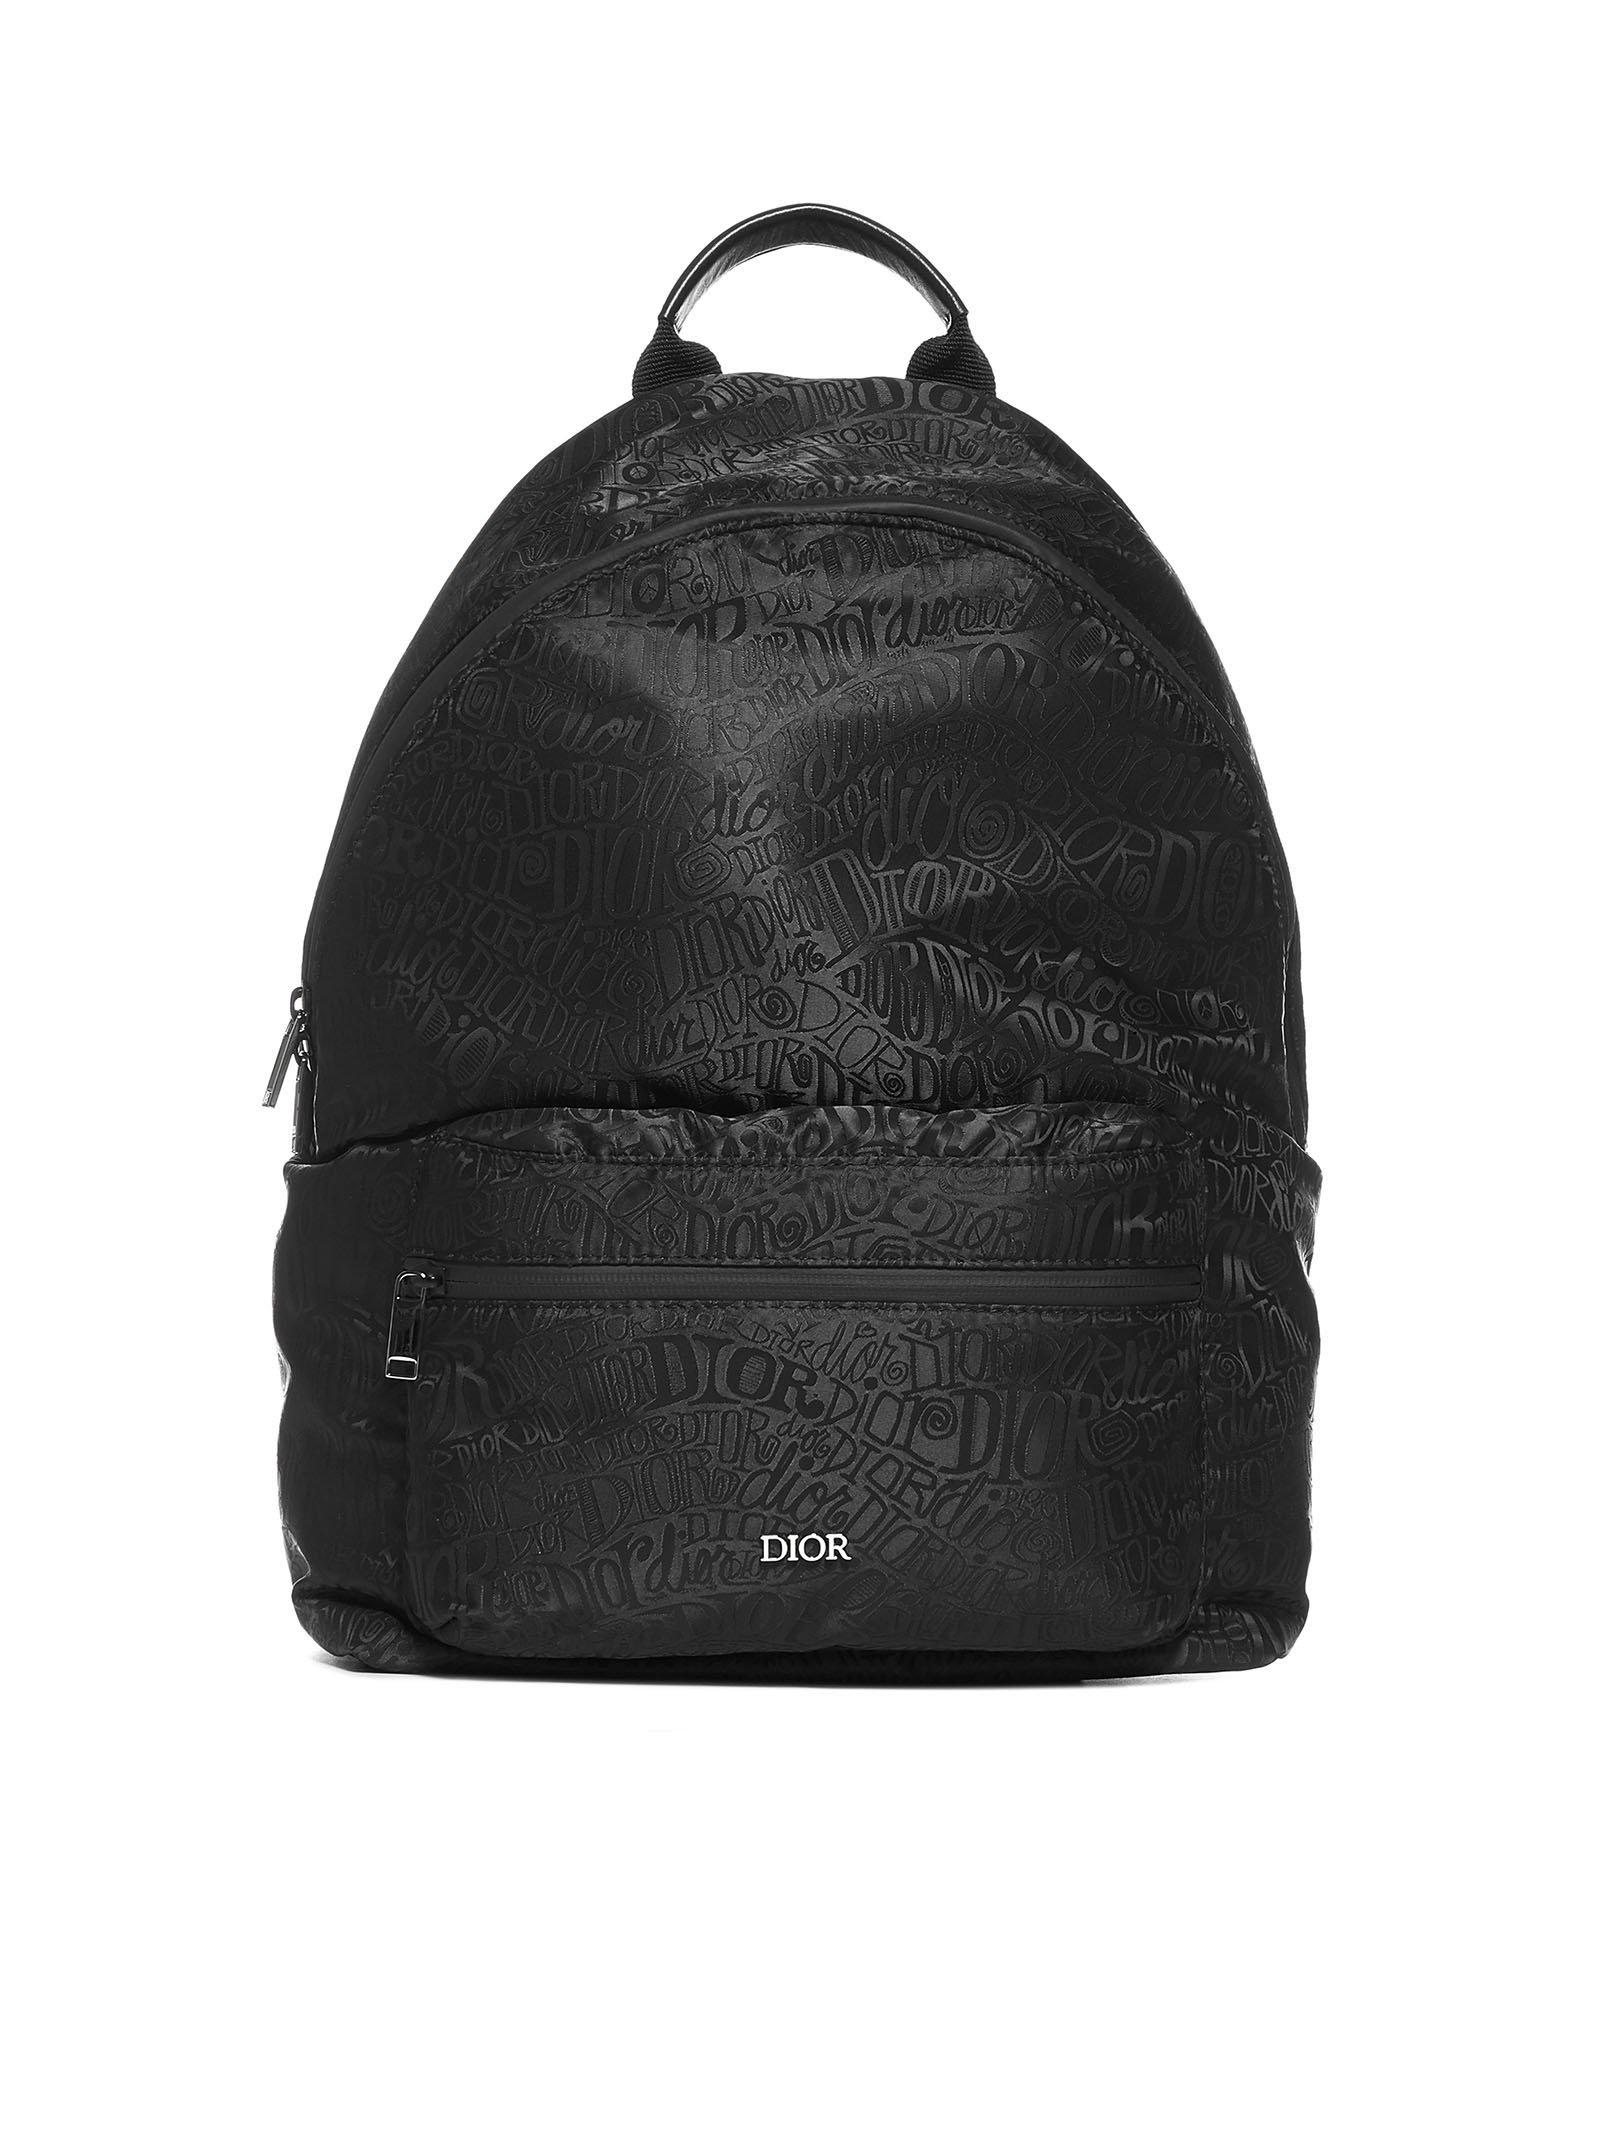 Dior X Shawn Stussy Rider Backpack in Black for Men | Lyst